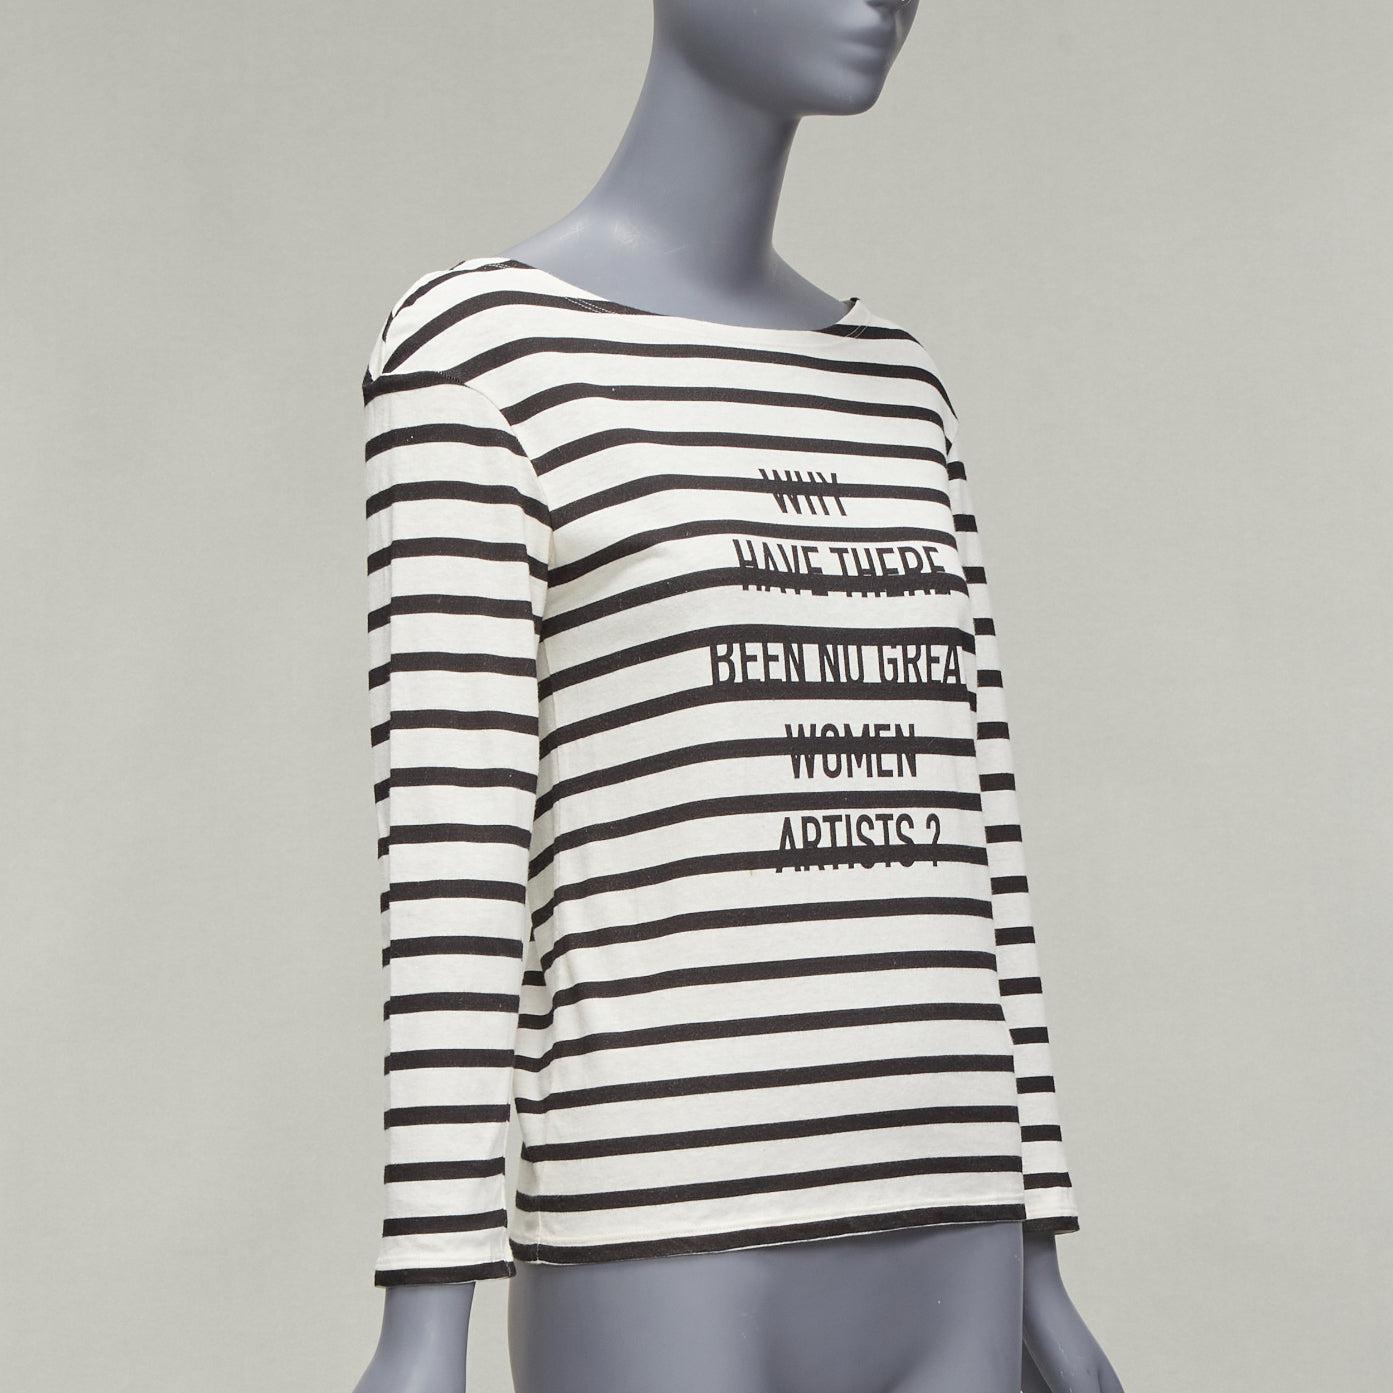 DIOR 2018 Runway No Great Women Artists striped cotton linen striped tshirt XS In Good Condition For Sale In Hong Kong, NT